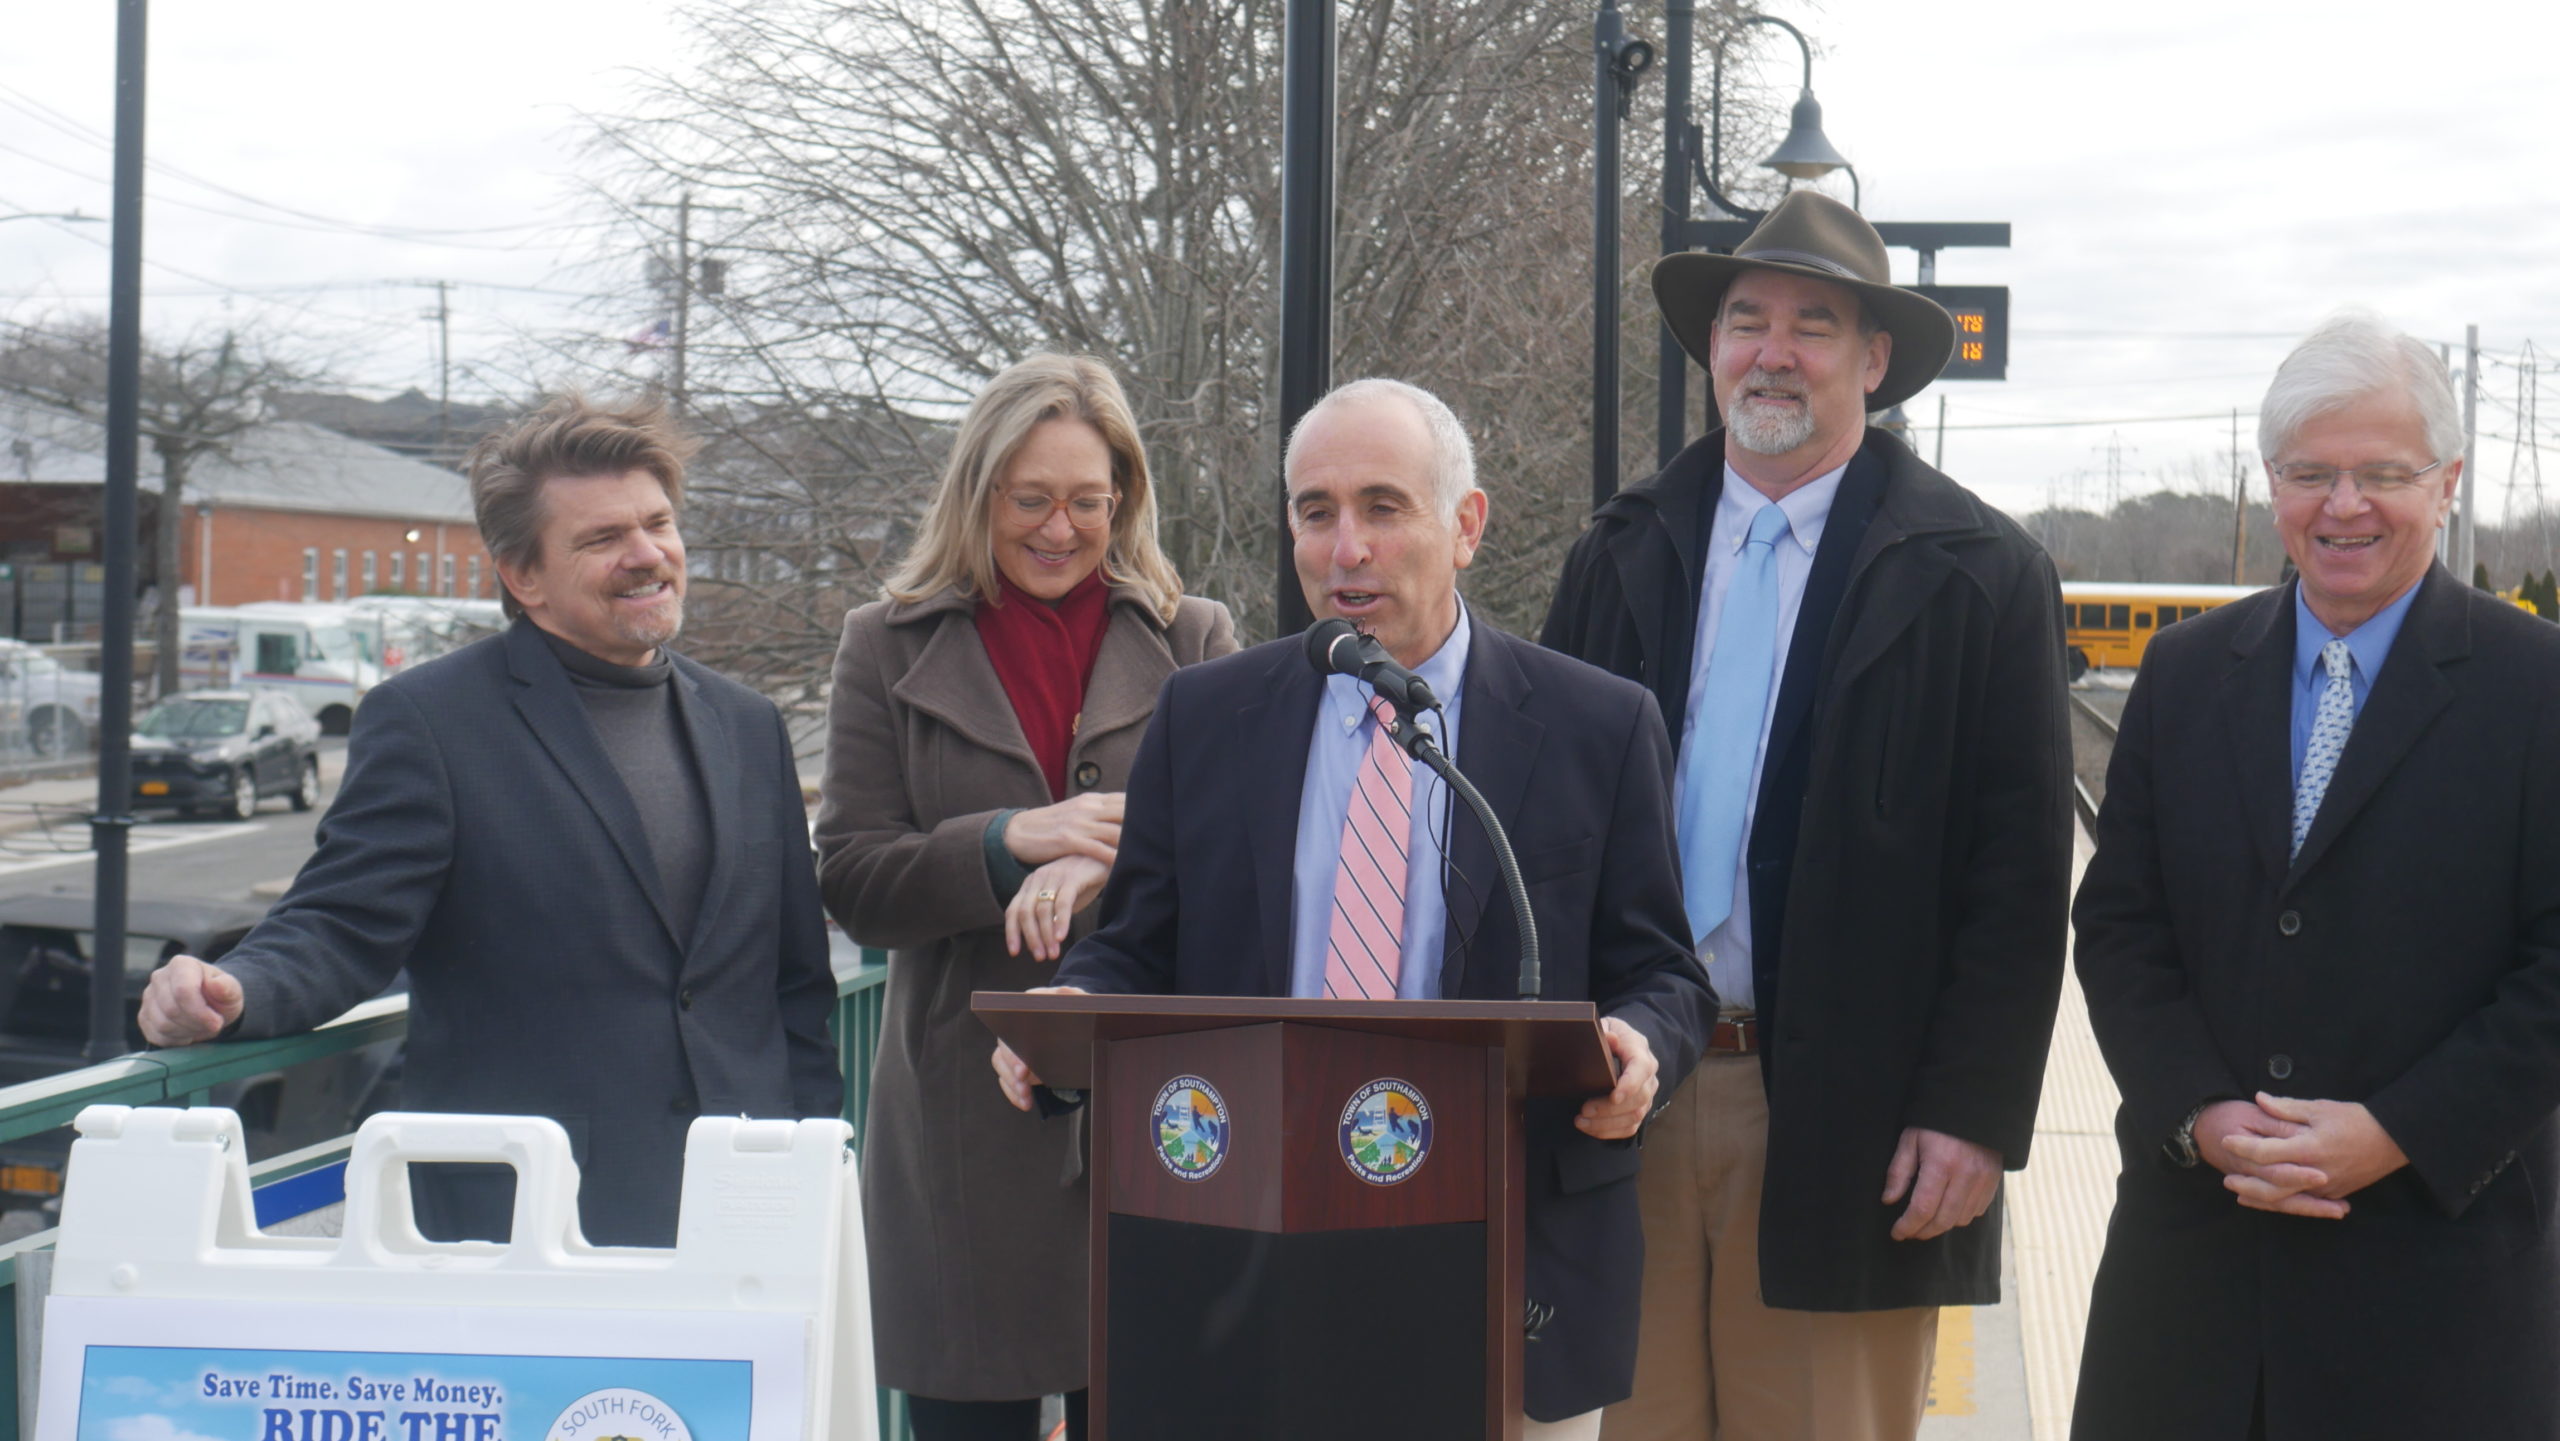 Southampton Town Supervisor Jay Schneiderman discusses the success of the South Fork Commuter Connection as Southampton Town Councilman Tommy John Schiavoni, Suffolk County Legislator Bridget Fleming, East Hampton Town Supervisor Peter Van Scoyoc, and Assemblyman Fred W. Thiele Jr. look on. CONNIE CONWAY